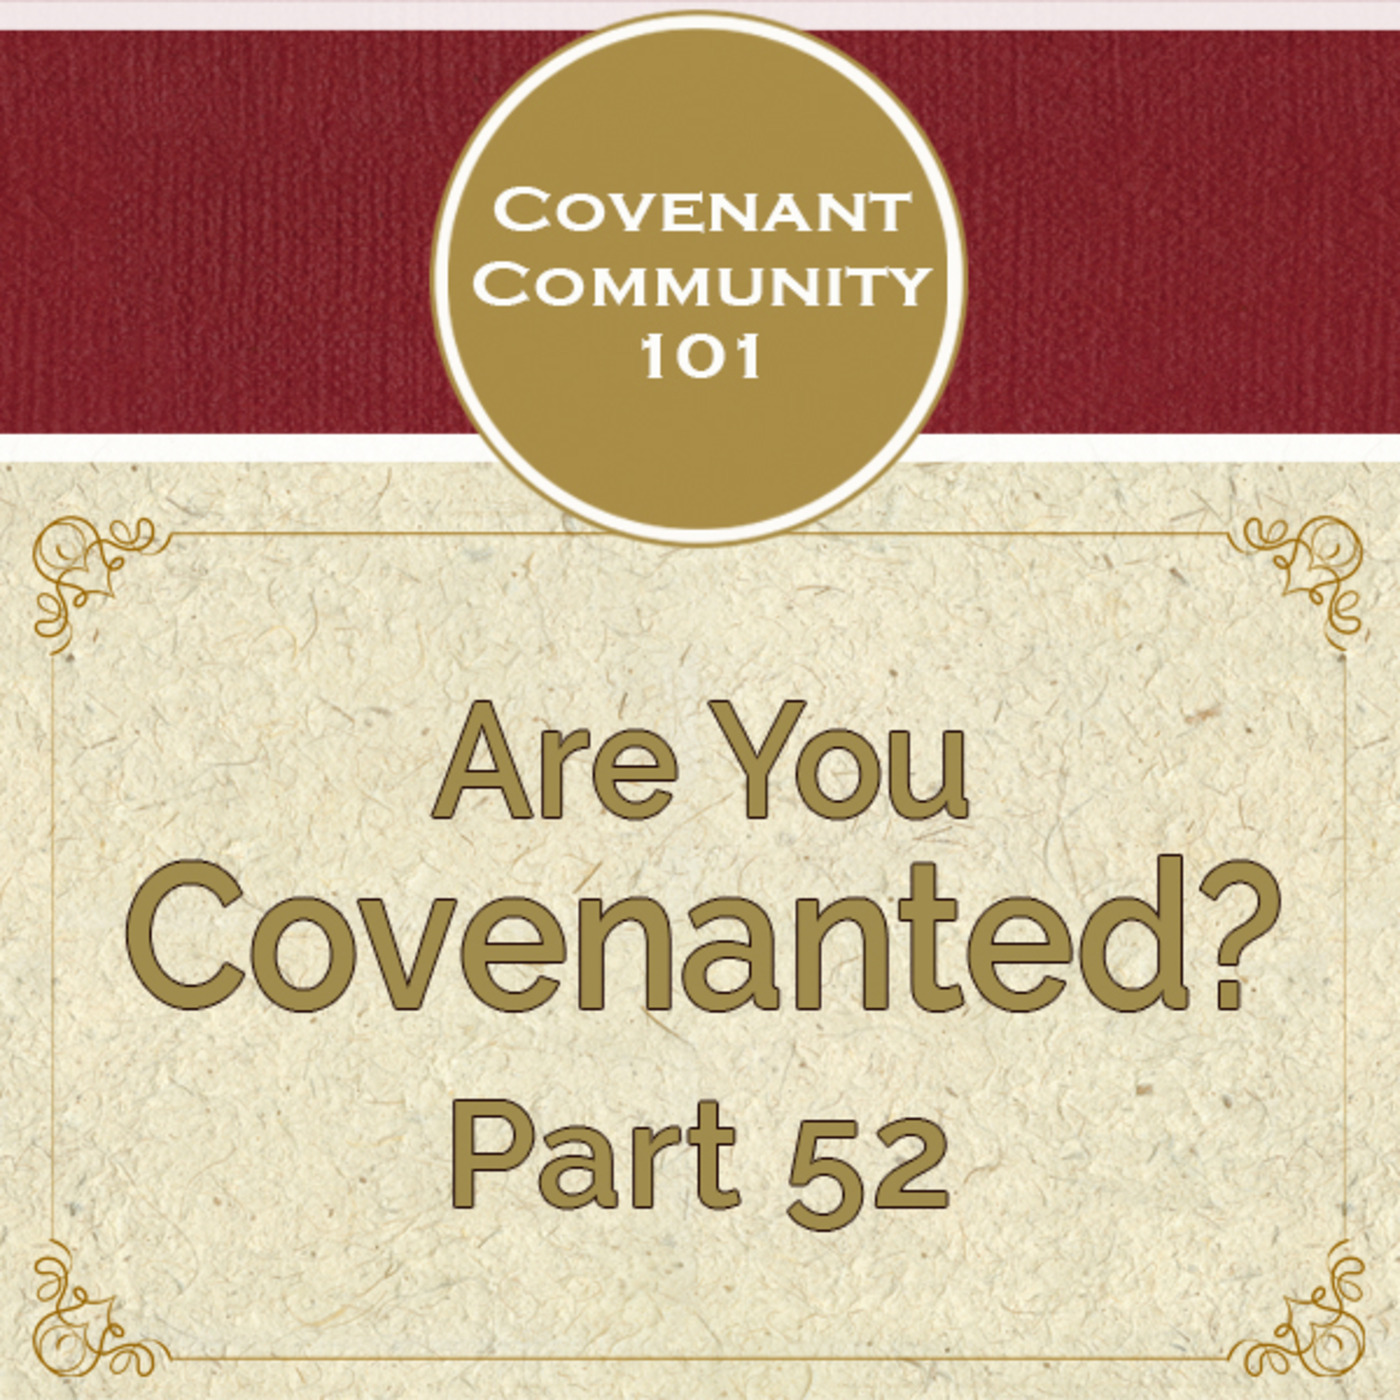 Covenant Community 101: Are You Covenanted? Part 52